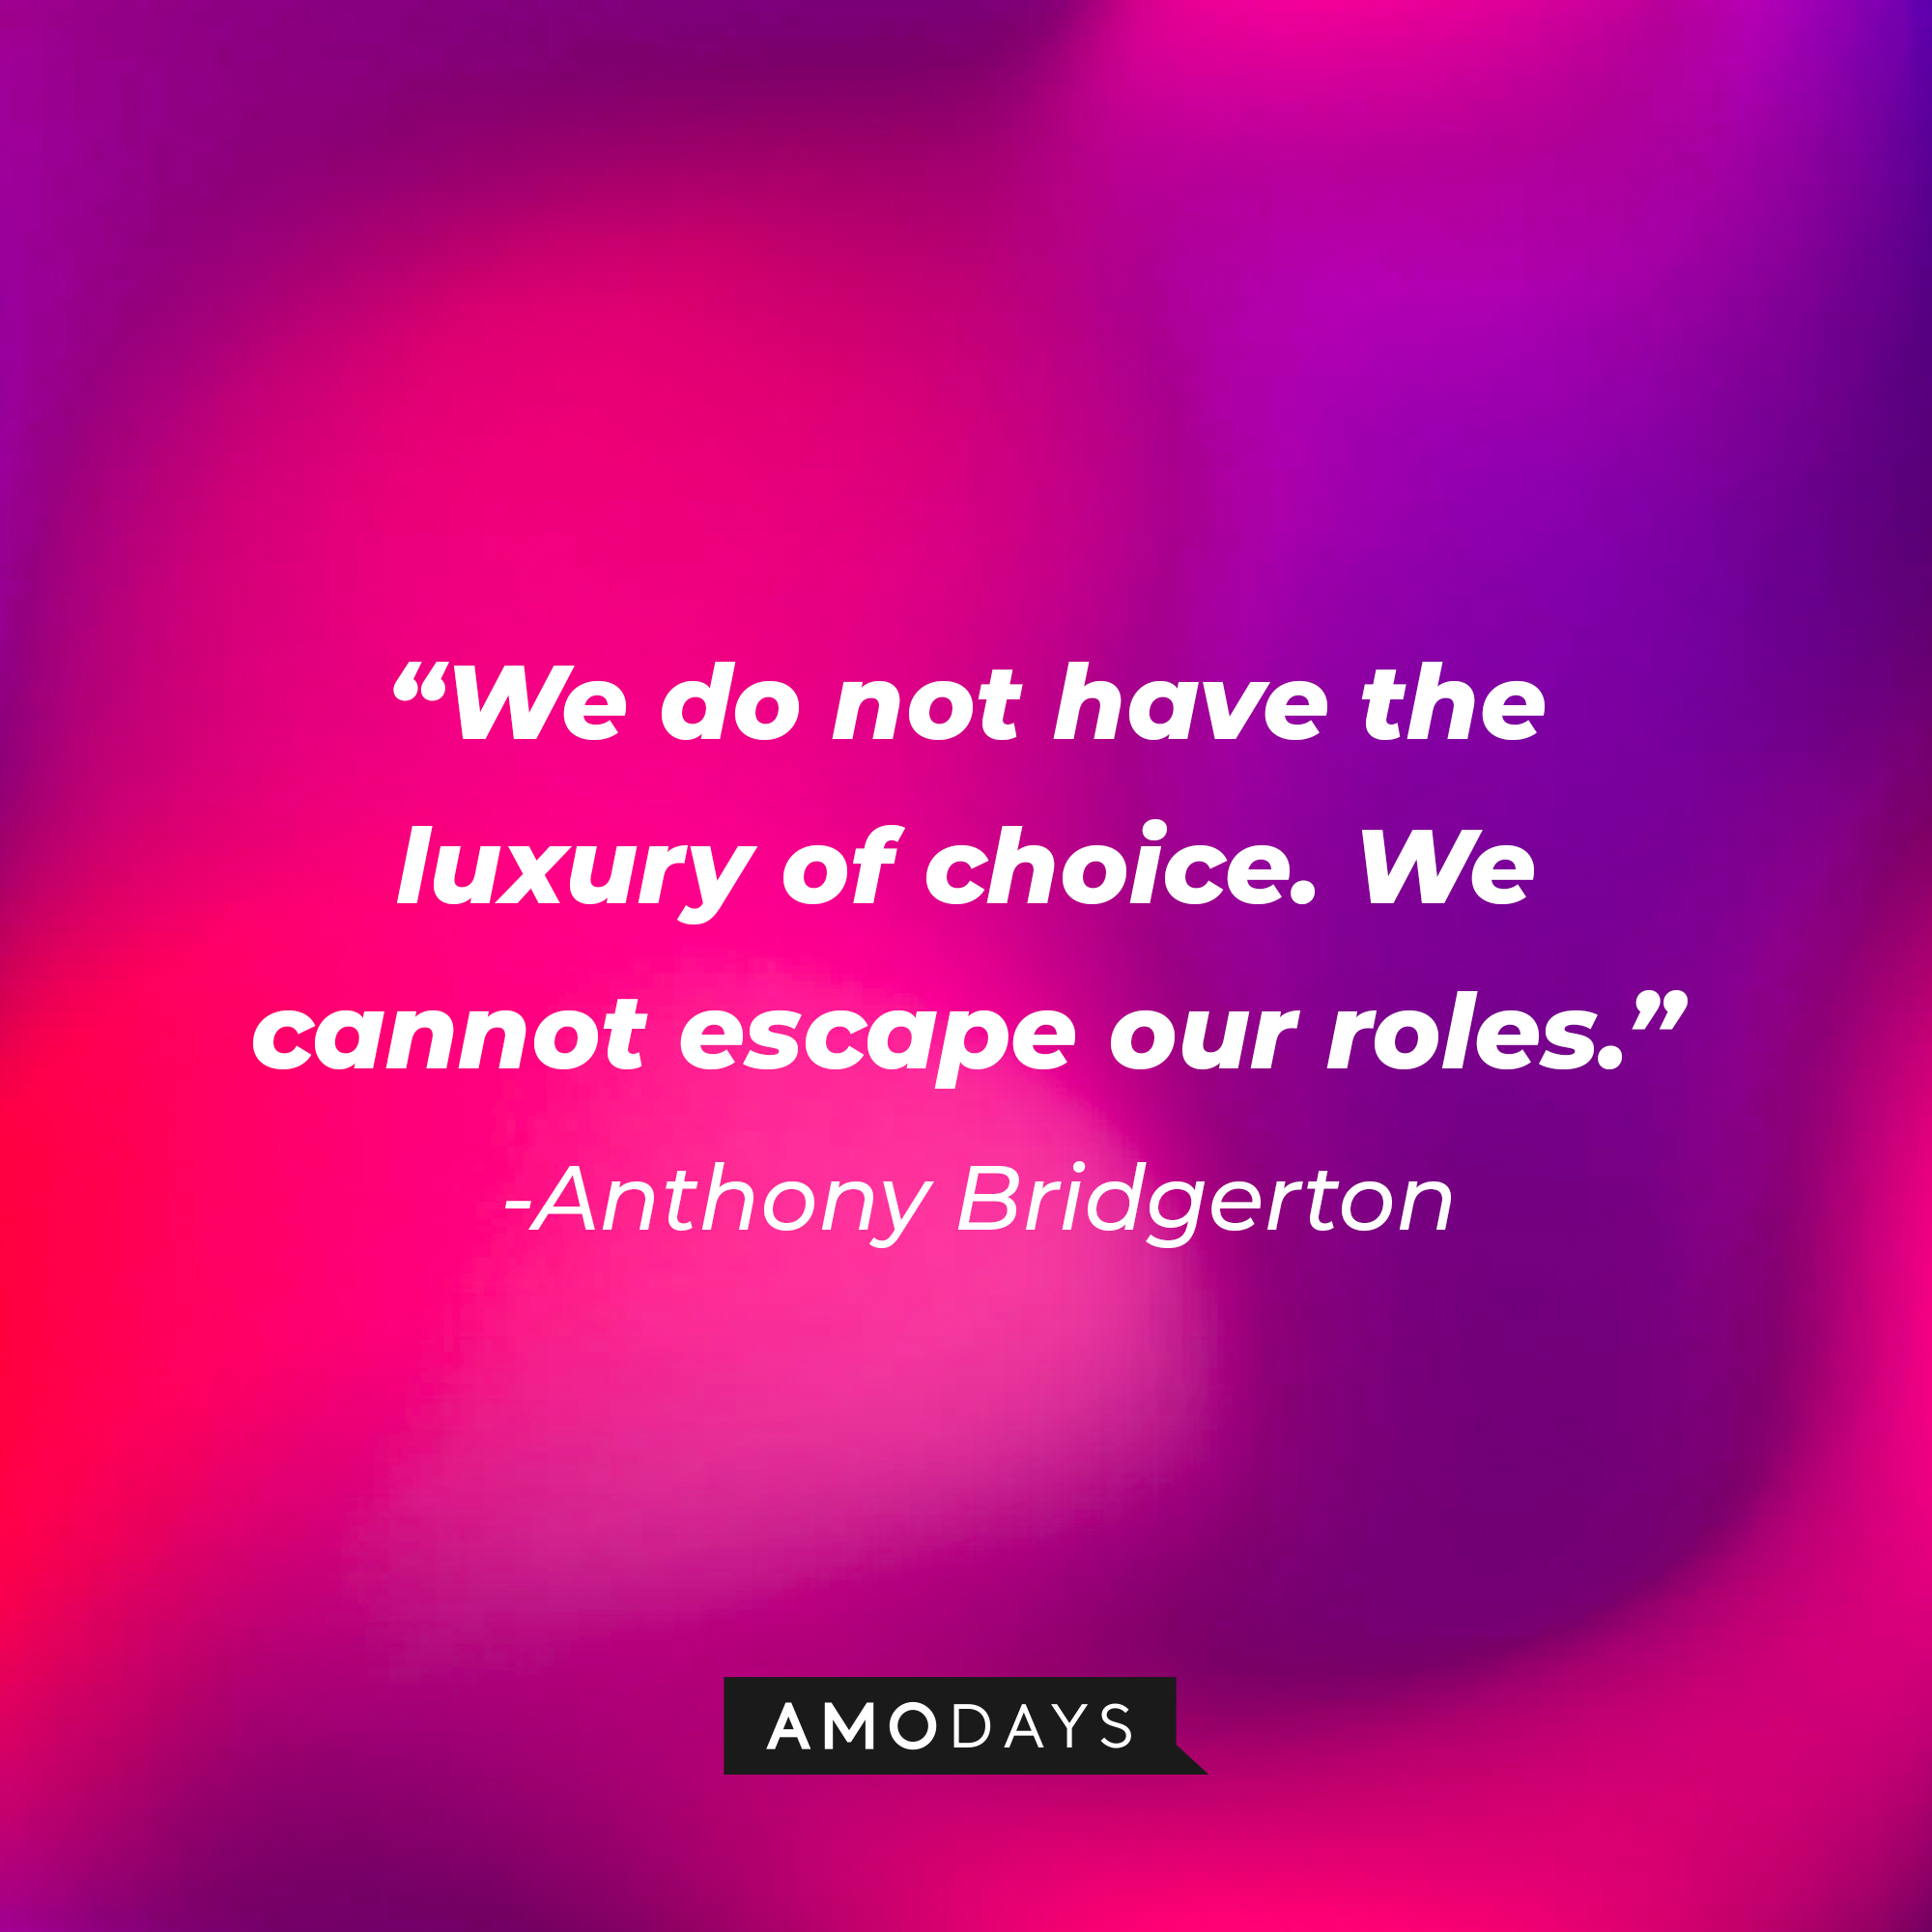 Anthony Bridgerton's quote: "We do not have the luxury of choice. We cannot escape our roles." | Source: AmoDays